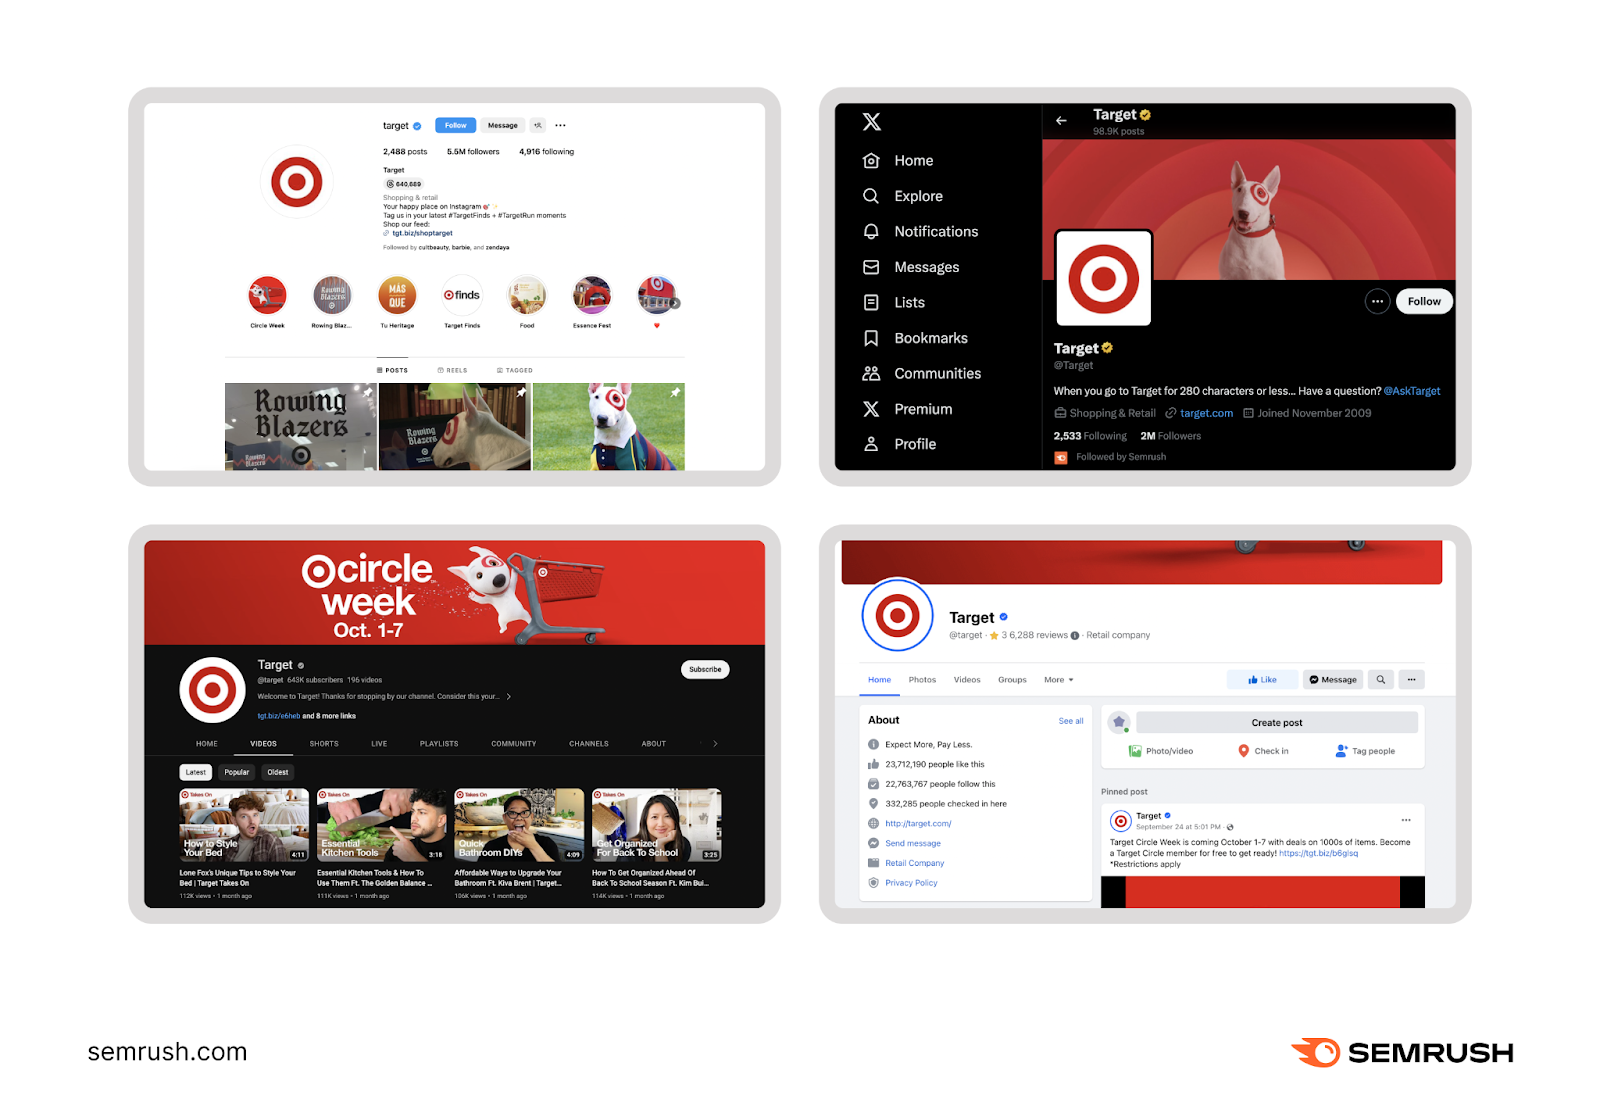 An infographic showing Target's different social media accounts